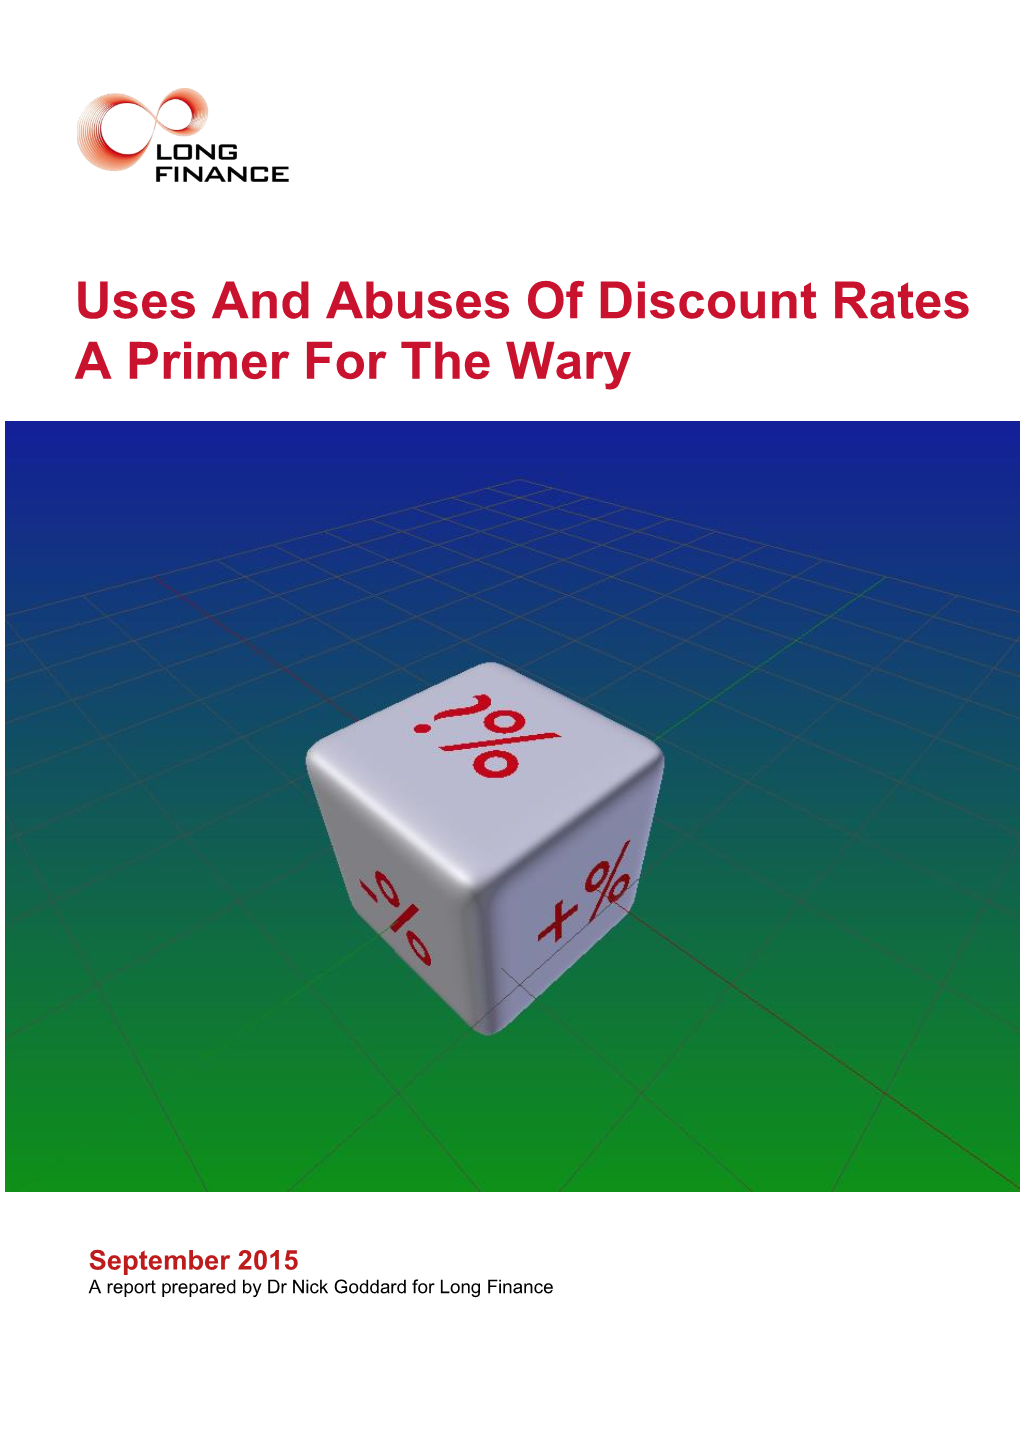 Uses and Abuses of Discount Rates a Primer for the Wary